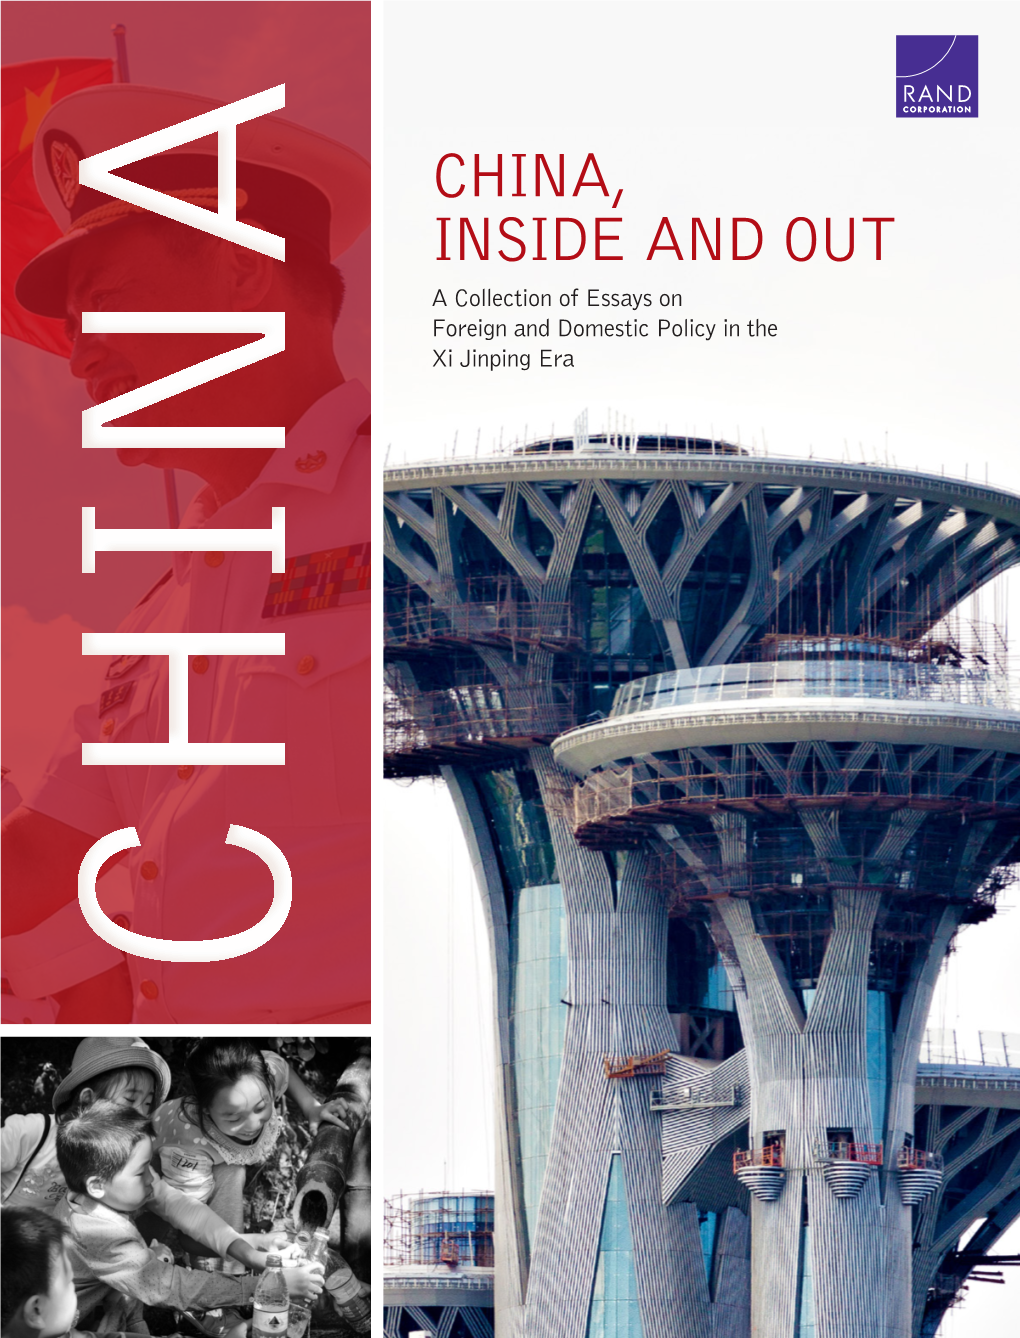 China, Inside and Out: a Collection of Essays on Foreign and Domestic